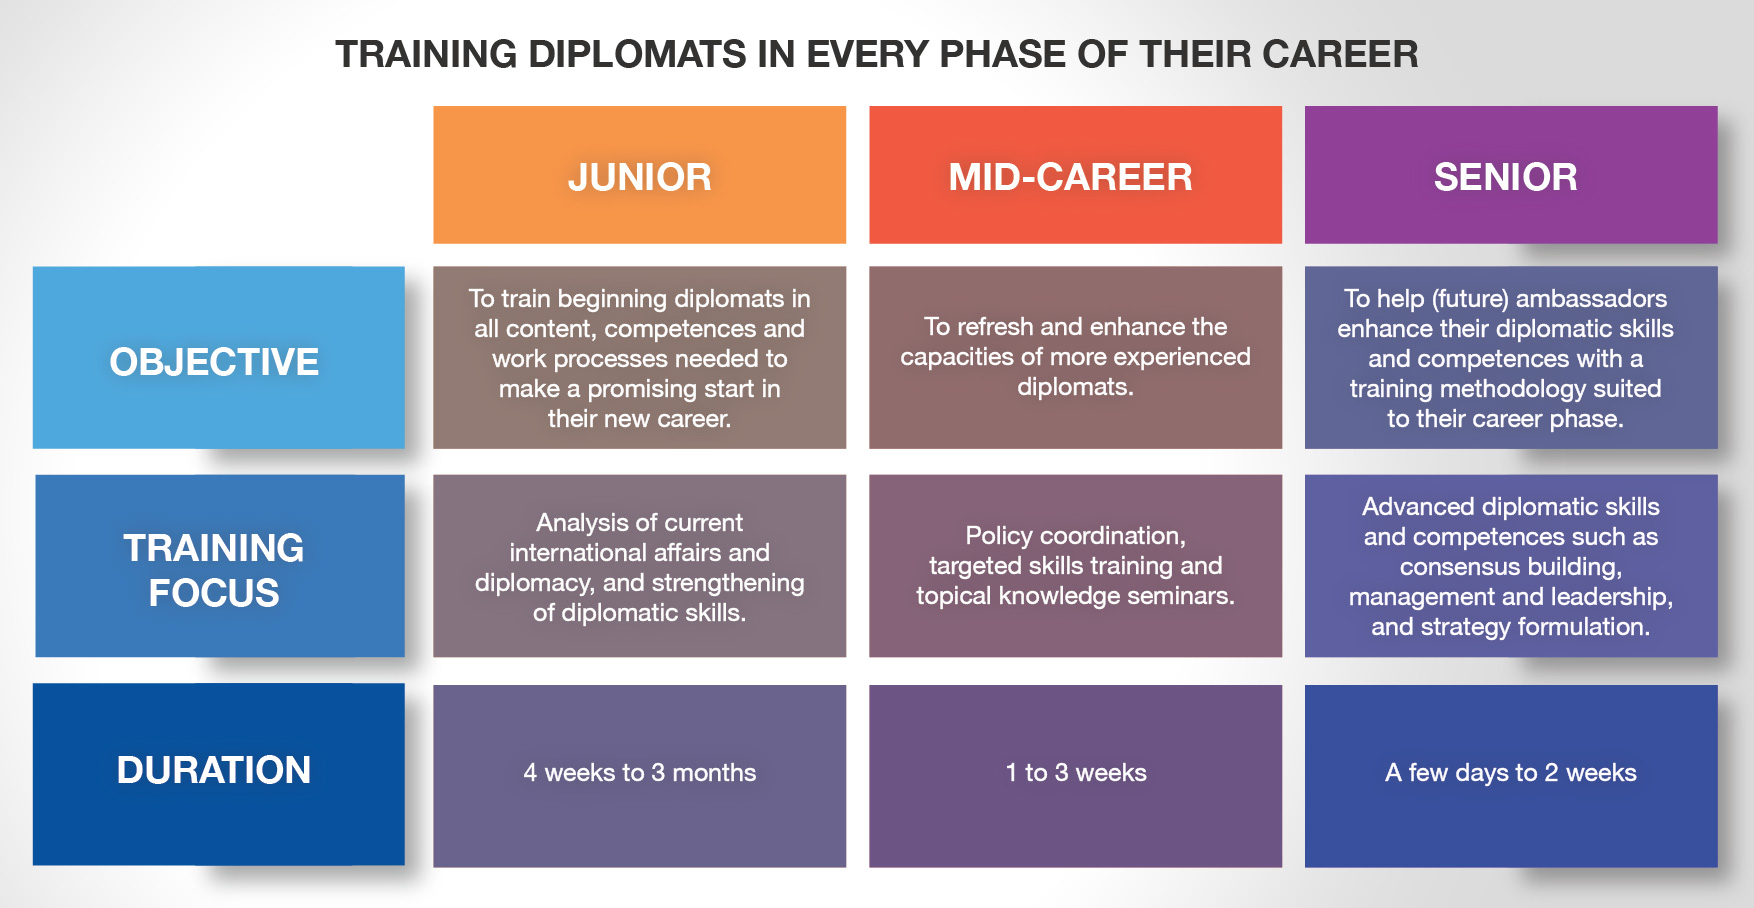 Diplomatic training for different levels has different characteristics